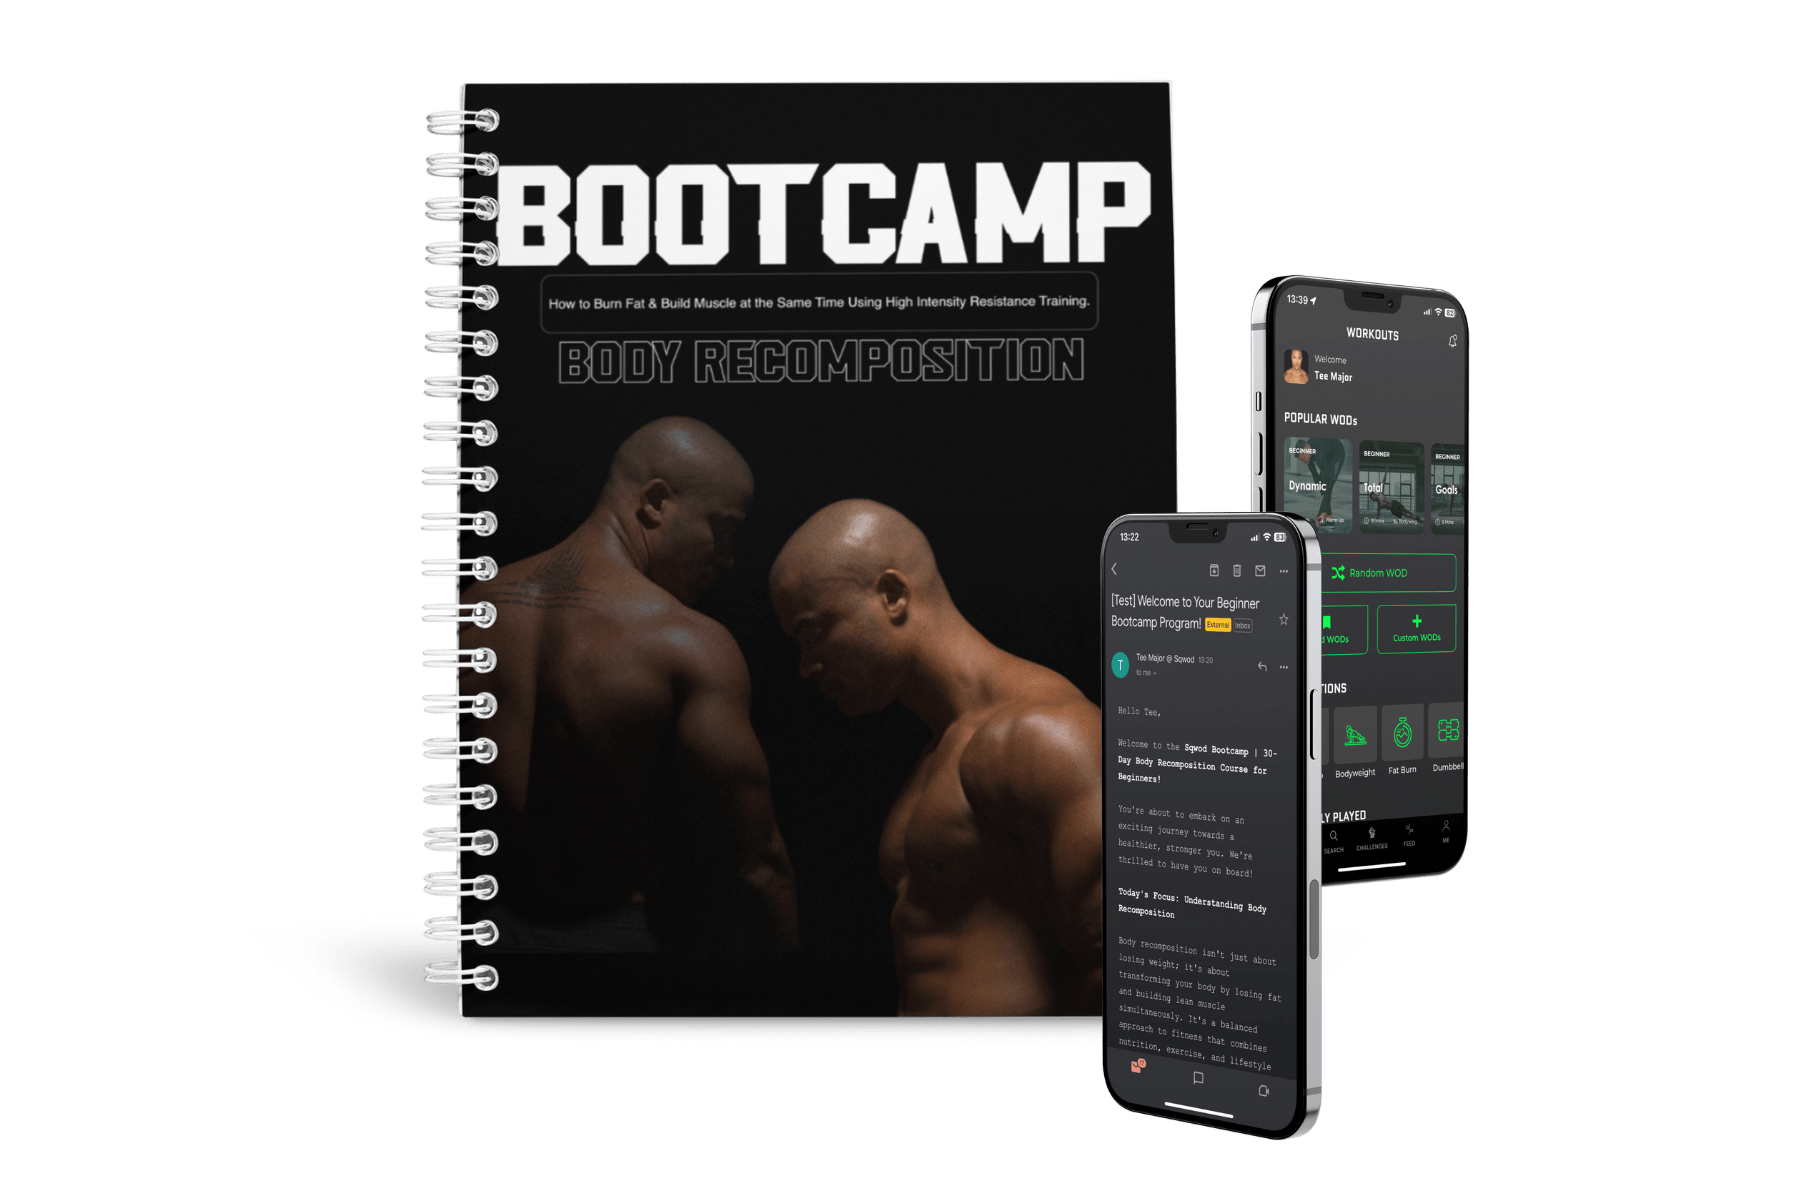 bootcamp course image